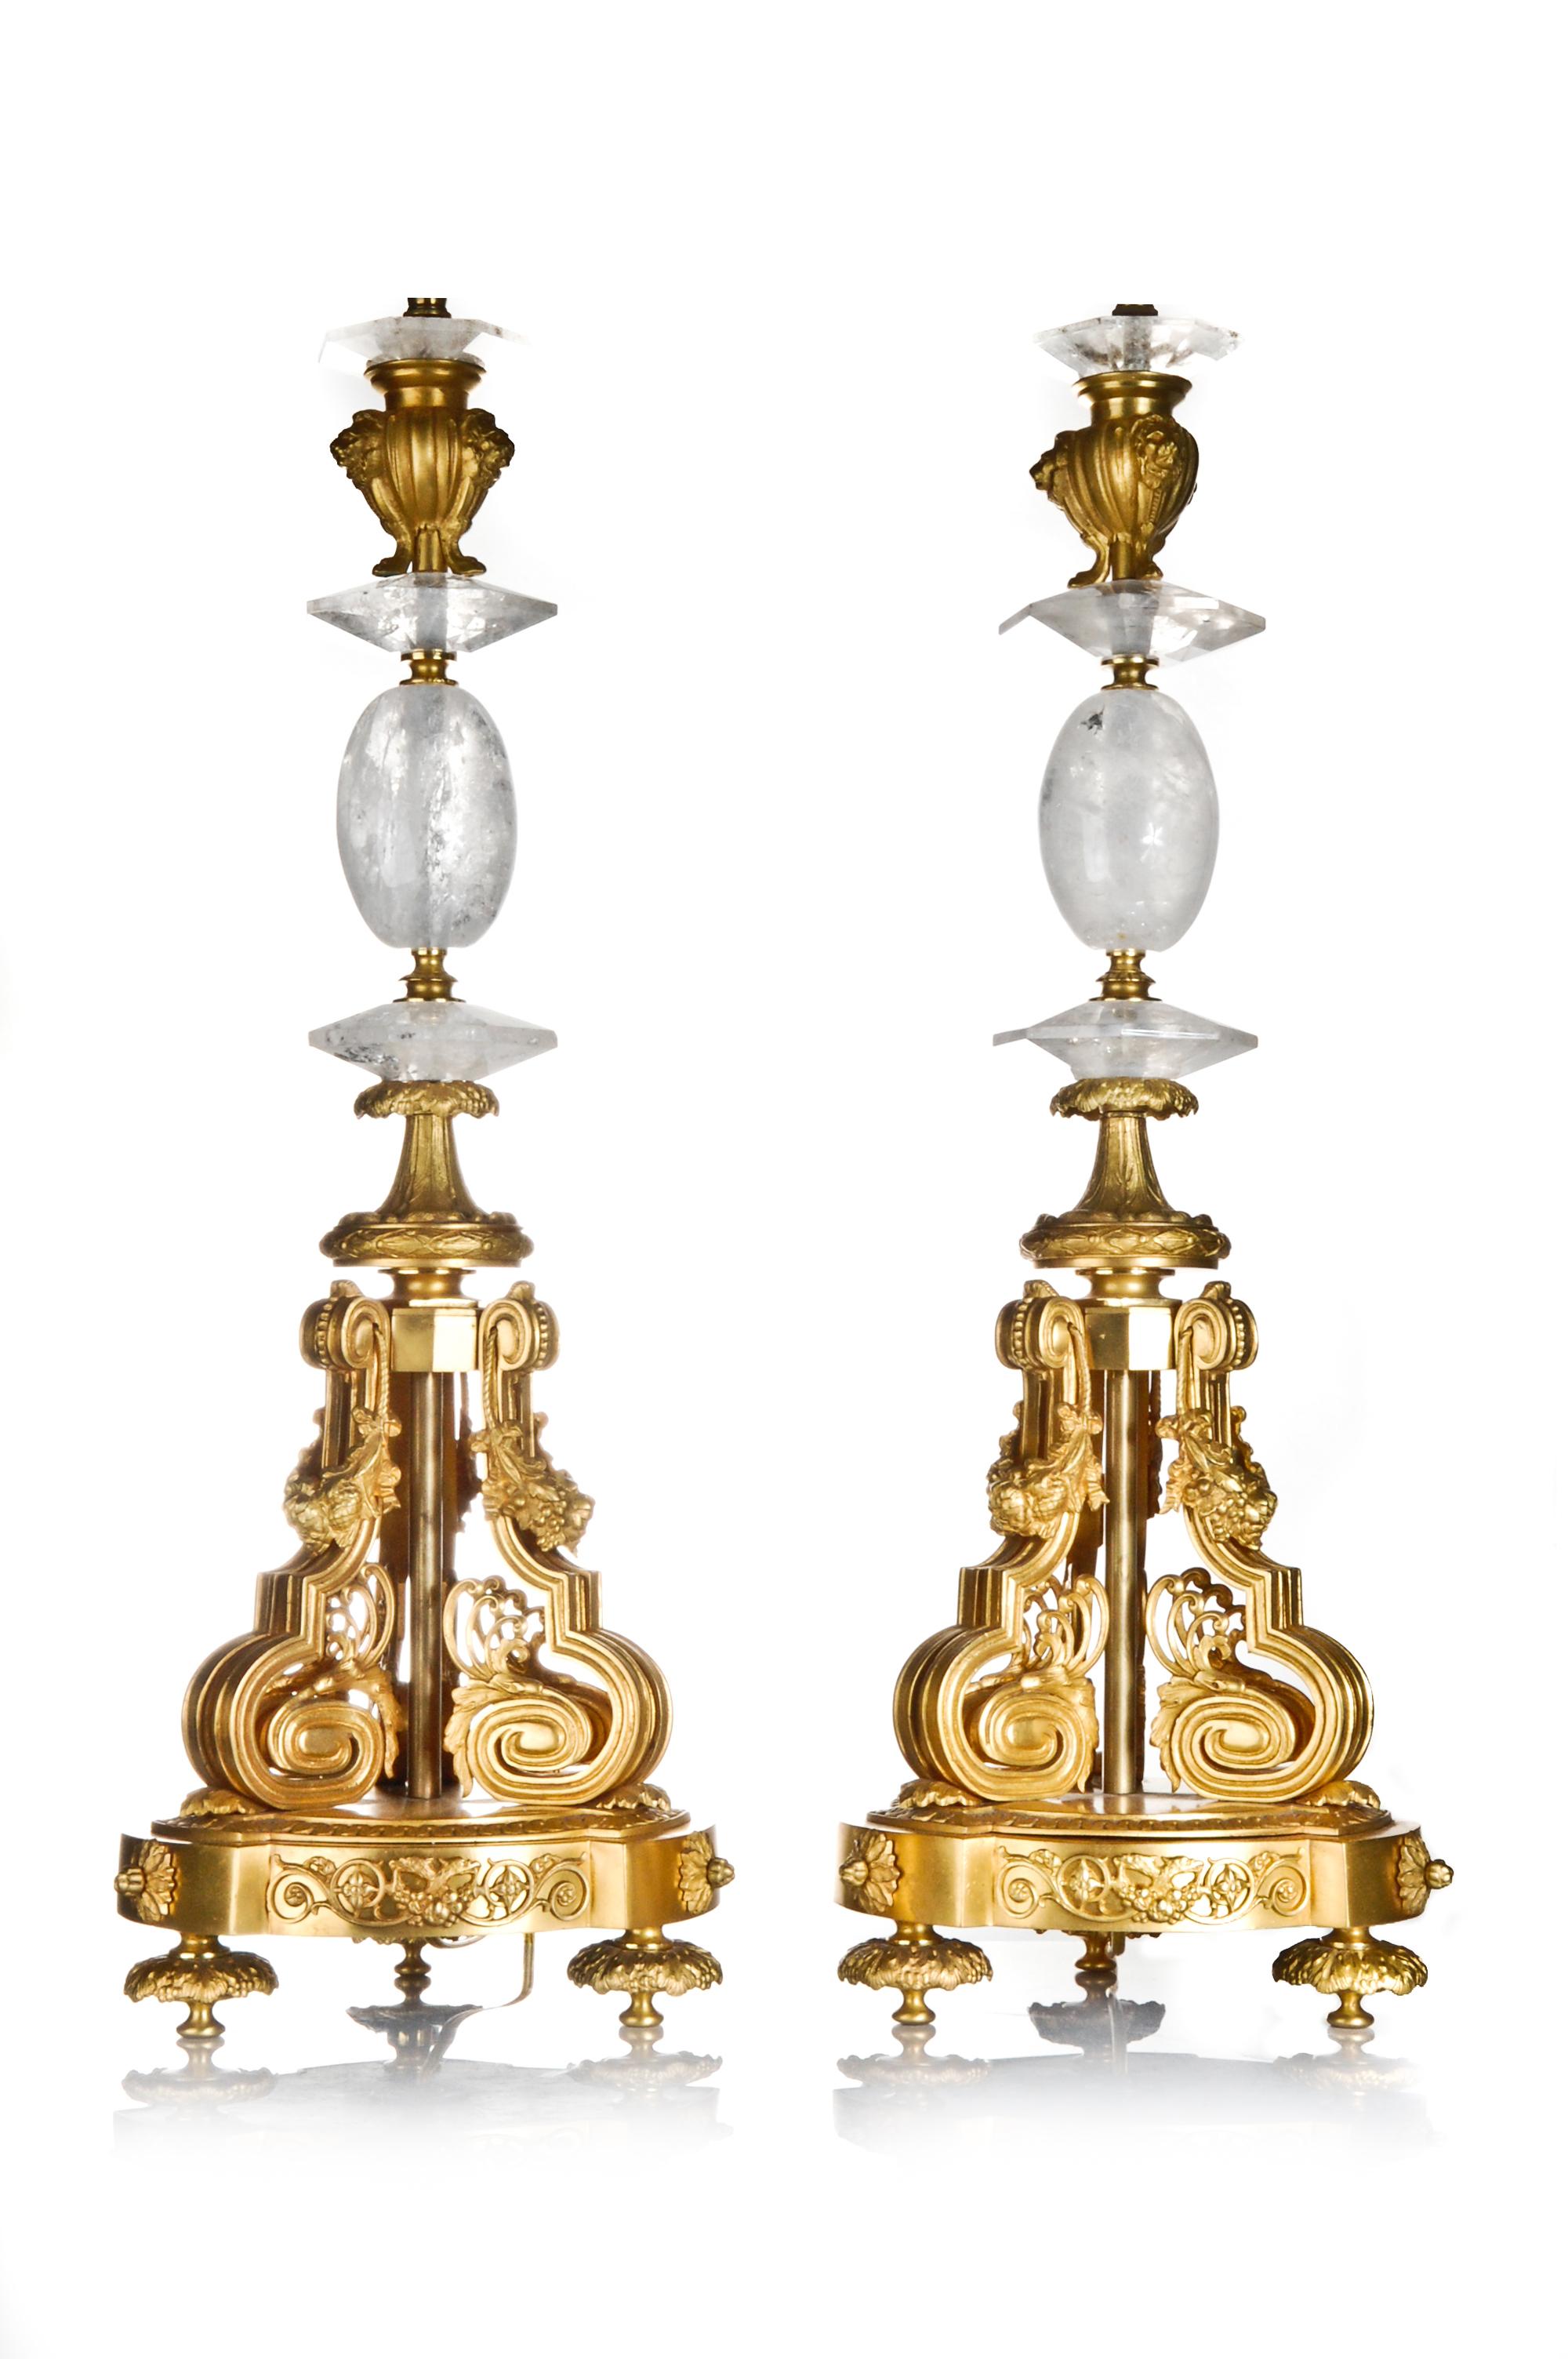 A pair of spectacular French Louis XVI style tall cut rock crystal and gilt bronze lamps embellished with flowers and figural masks.